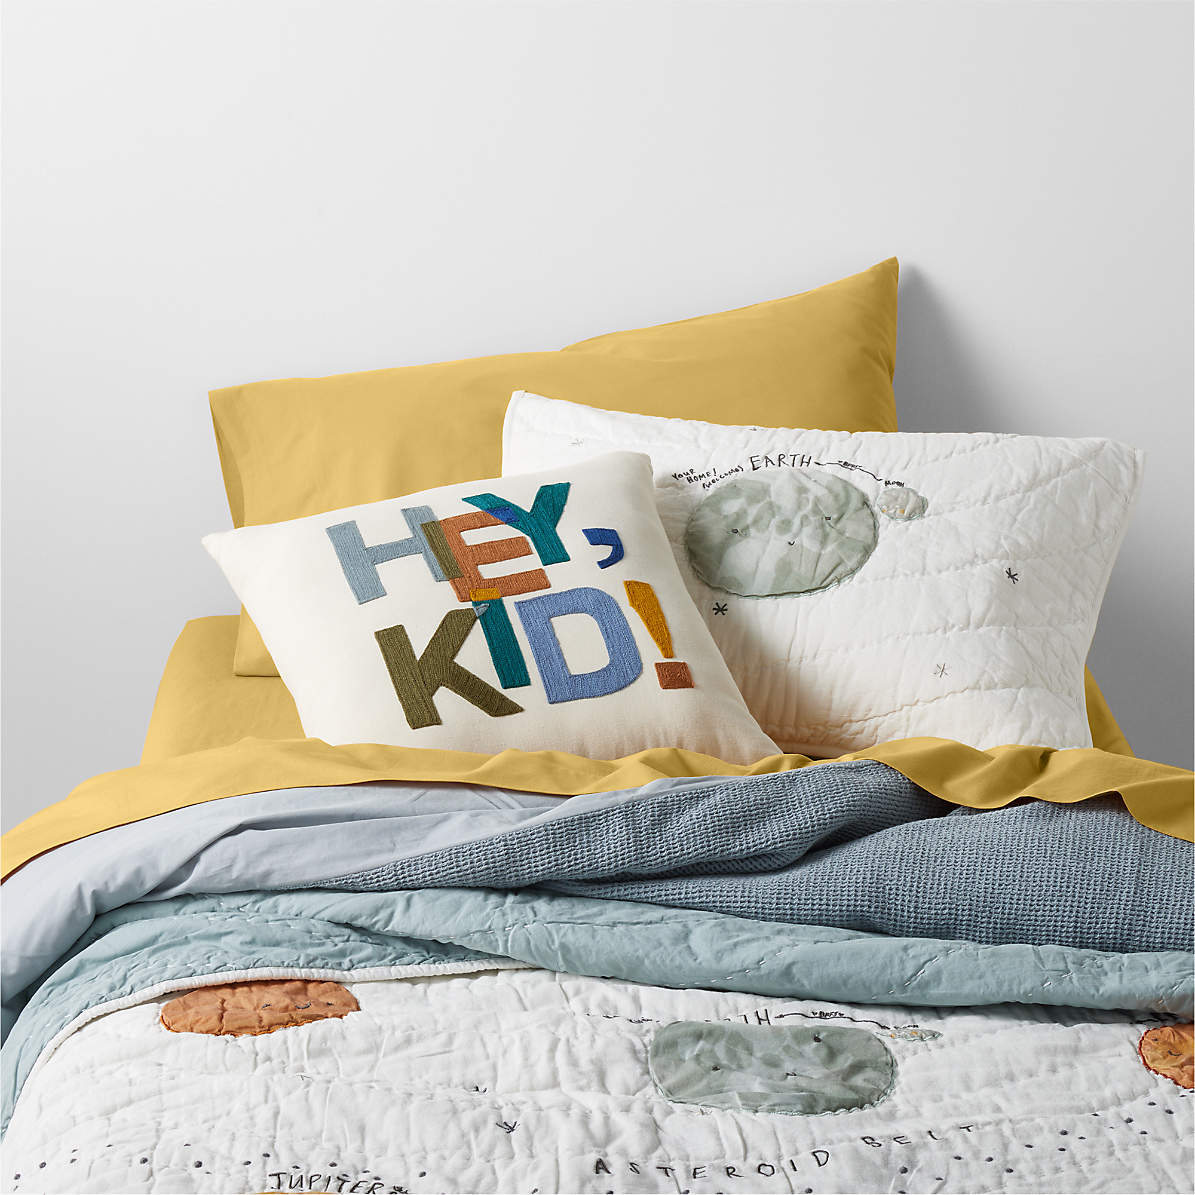 Why Choose Organic Bedding for Your Kids?